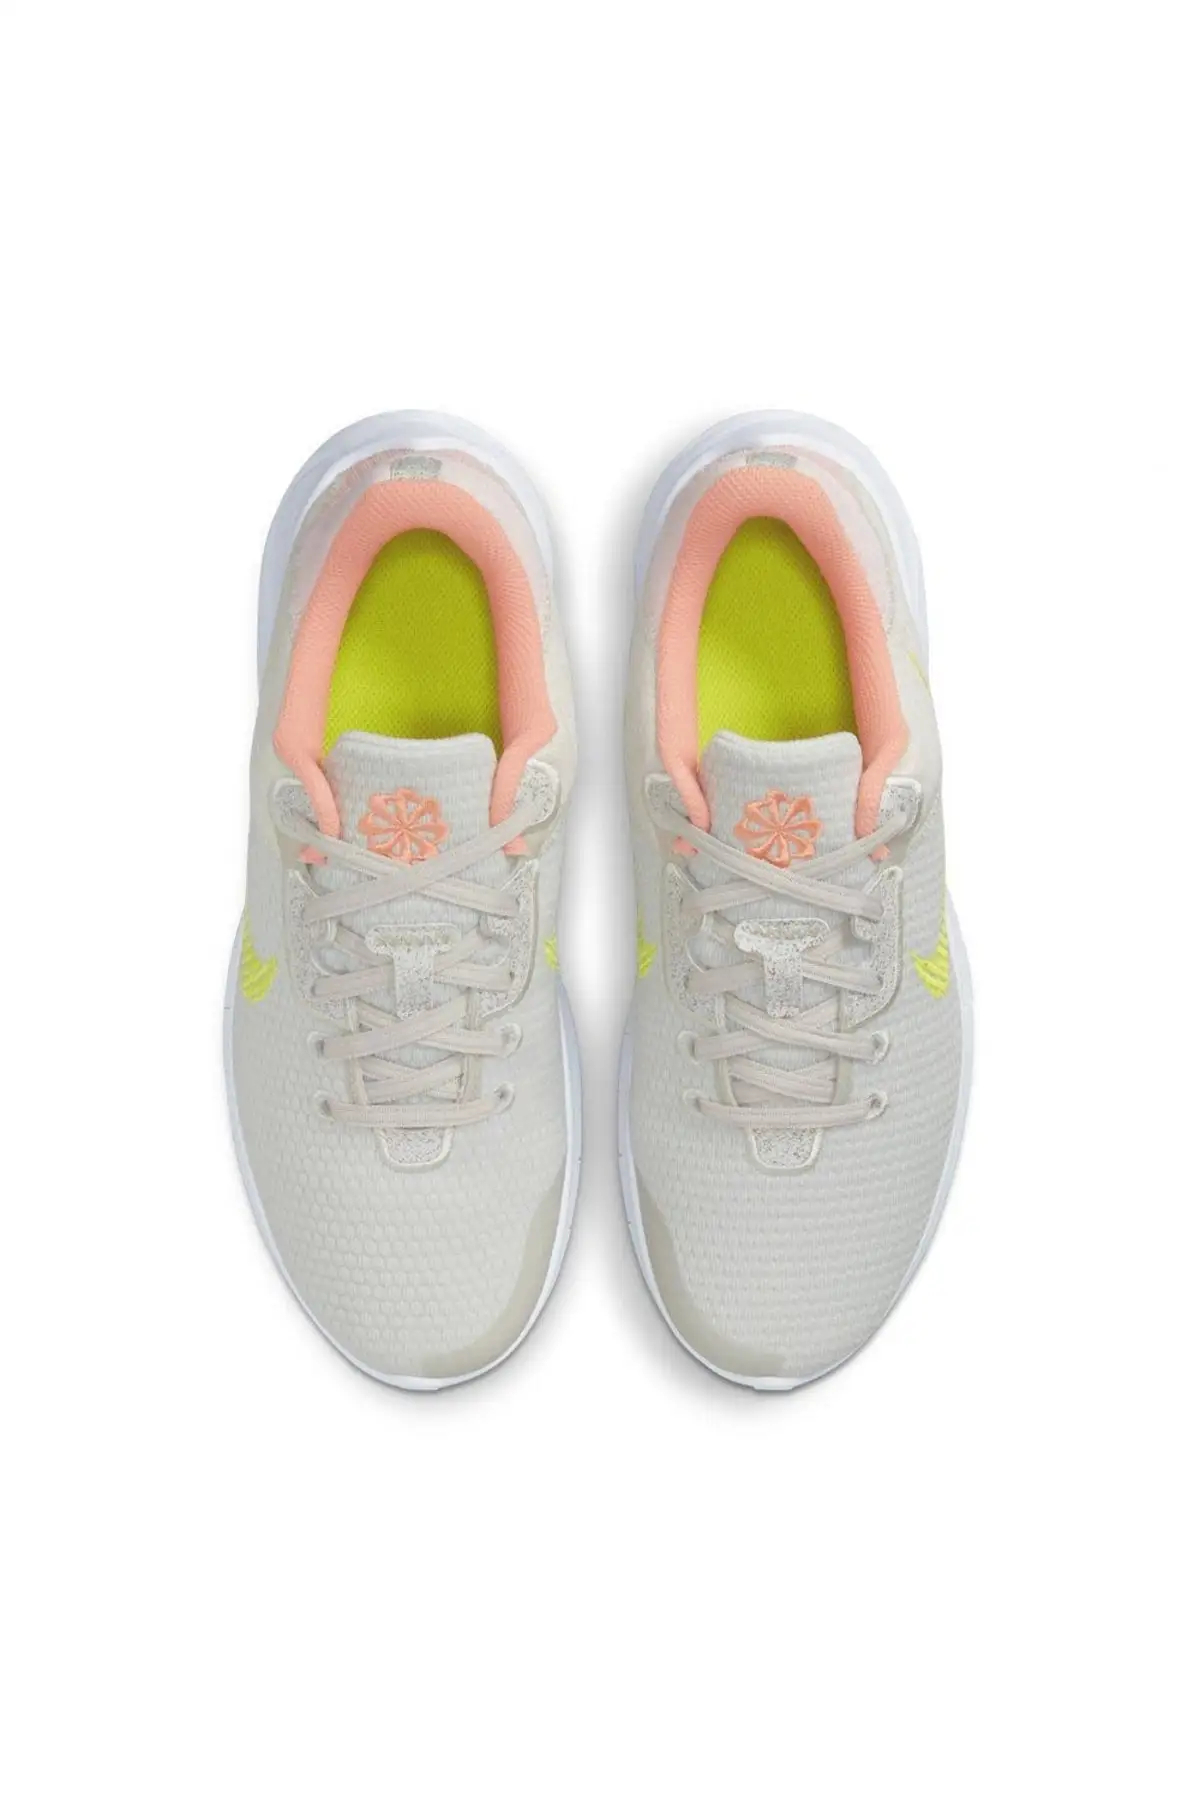 Unleash Your Potential with Women’s Nike Flex Shoes插图1